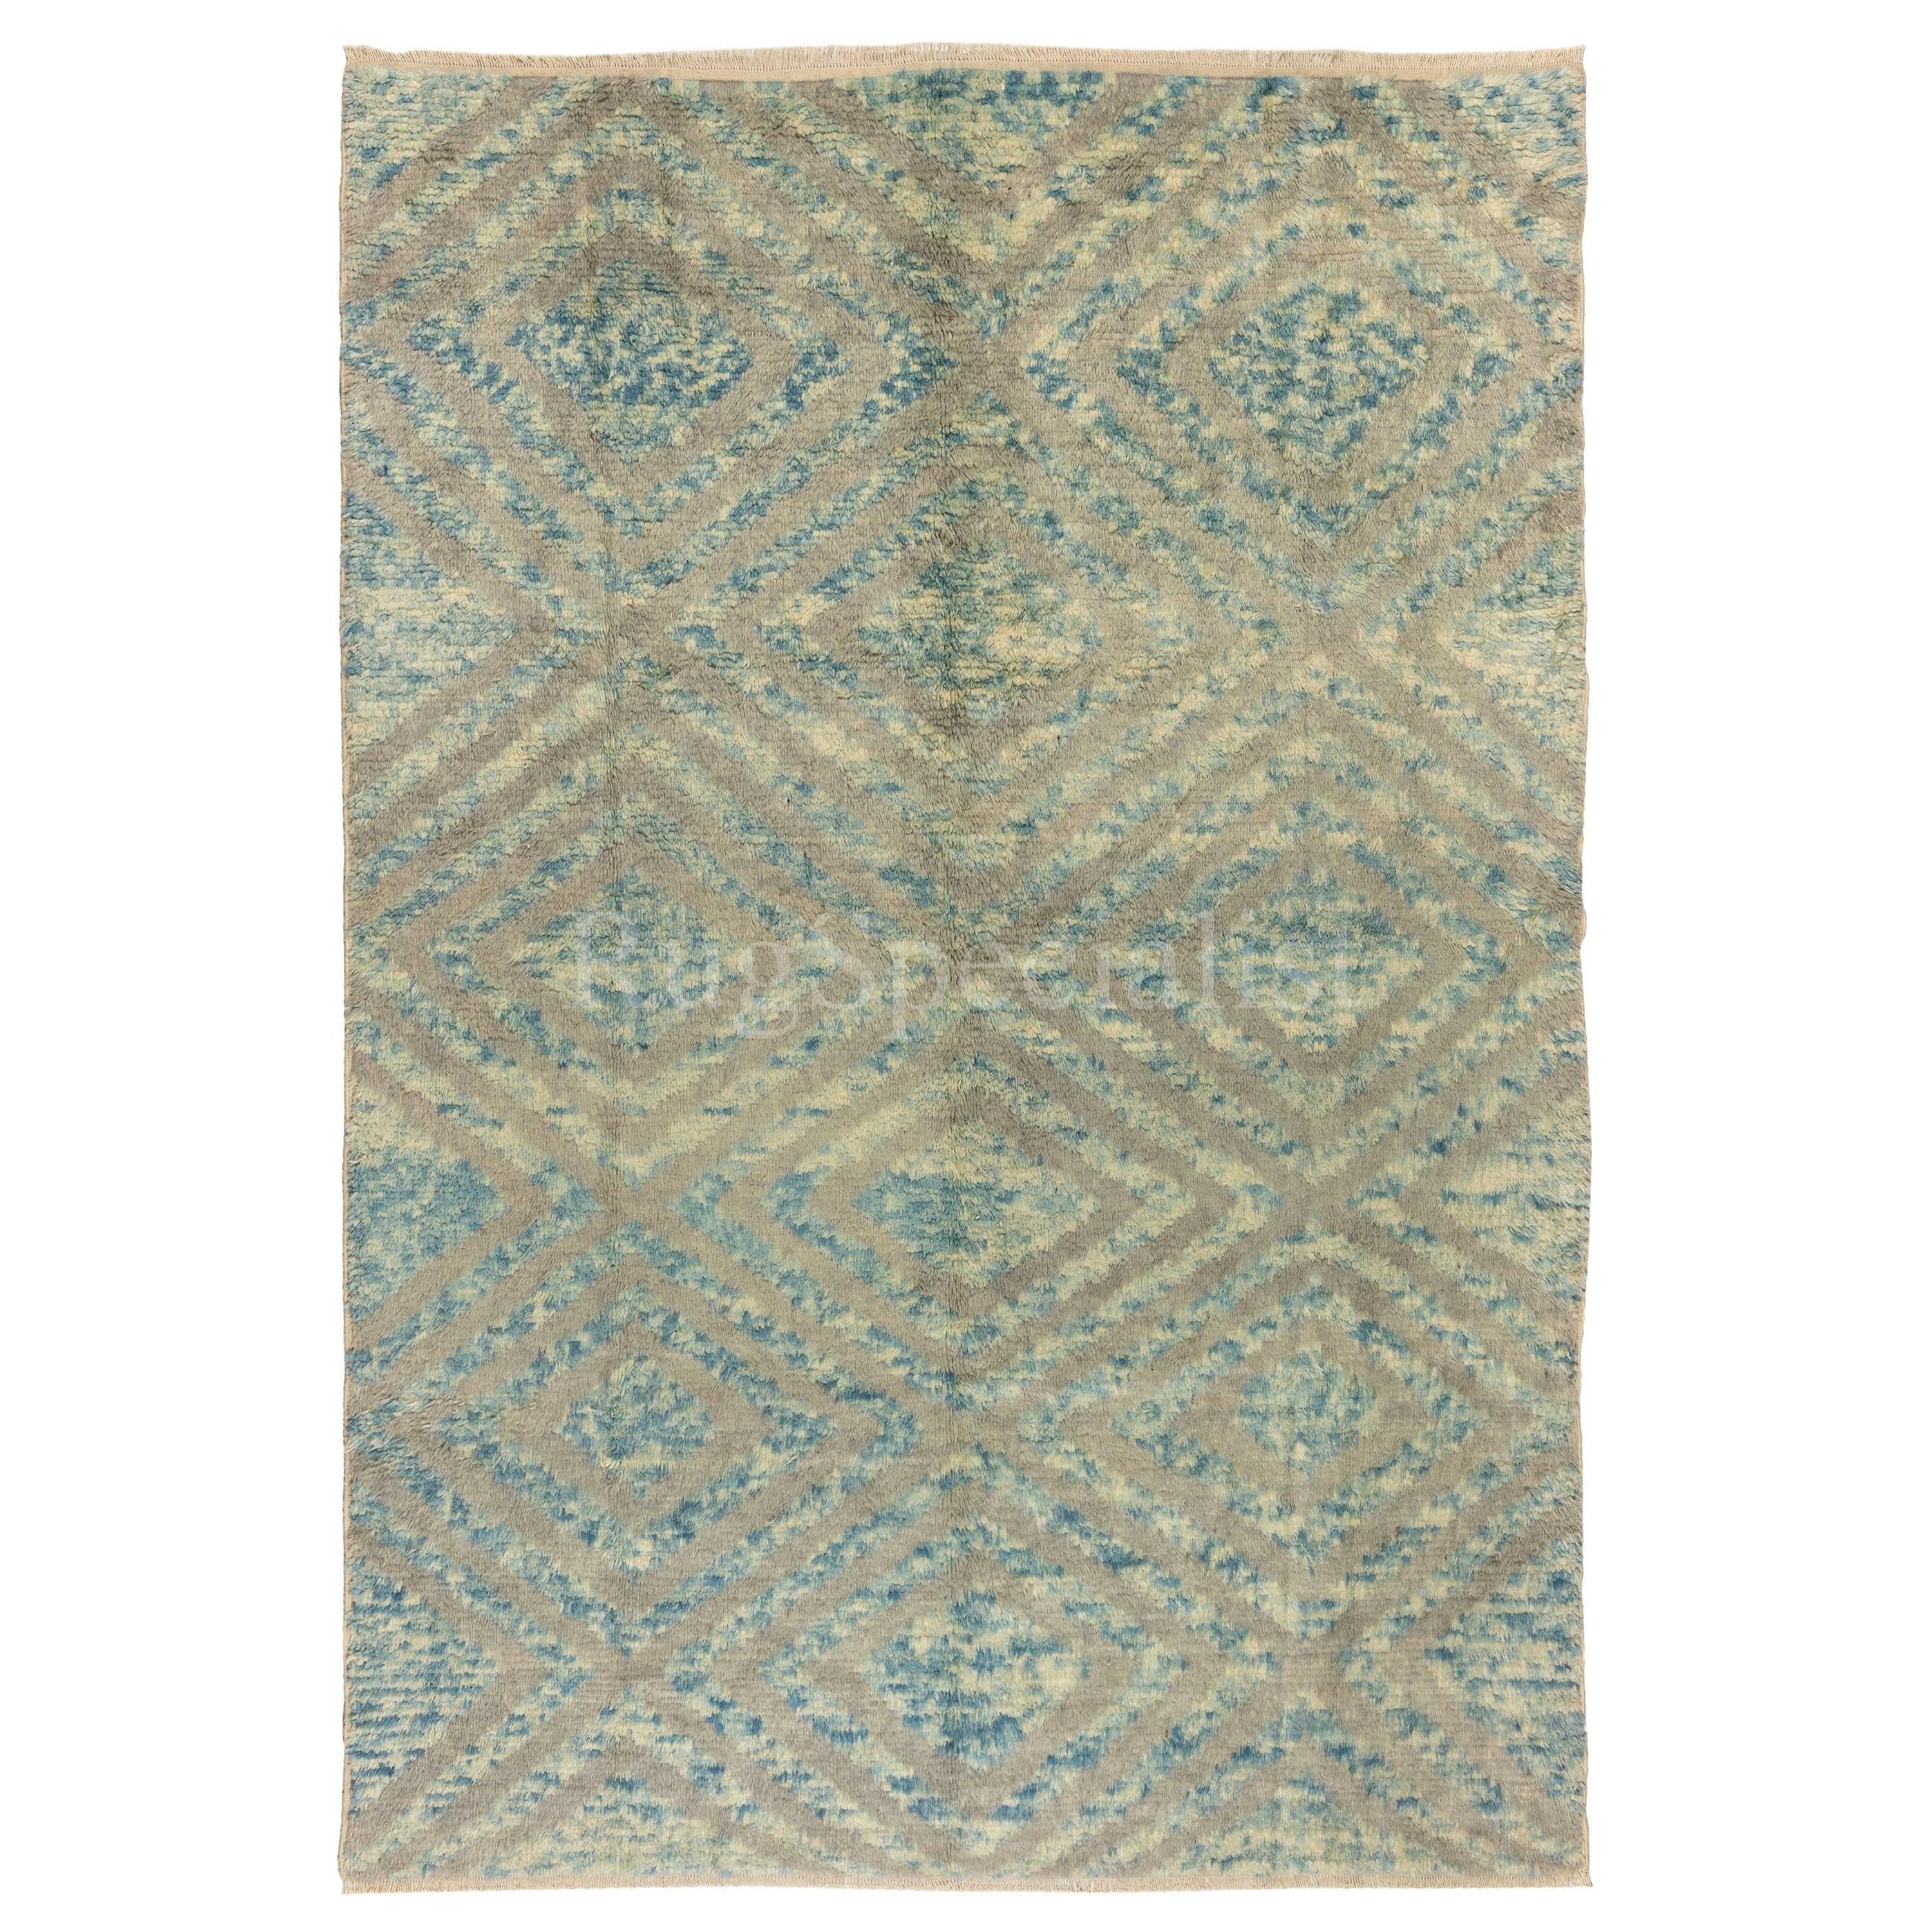 7.7x10.2 Ft Custom Hand Knotted "Tulu" Rug in Blue, Gray & Beige, 100% Wool For Sale